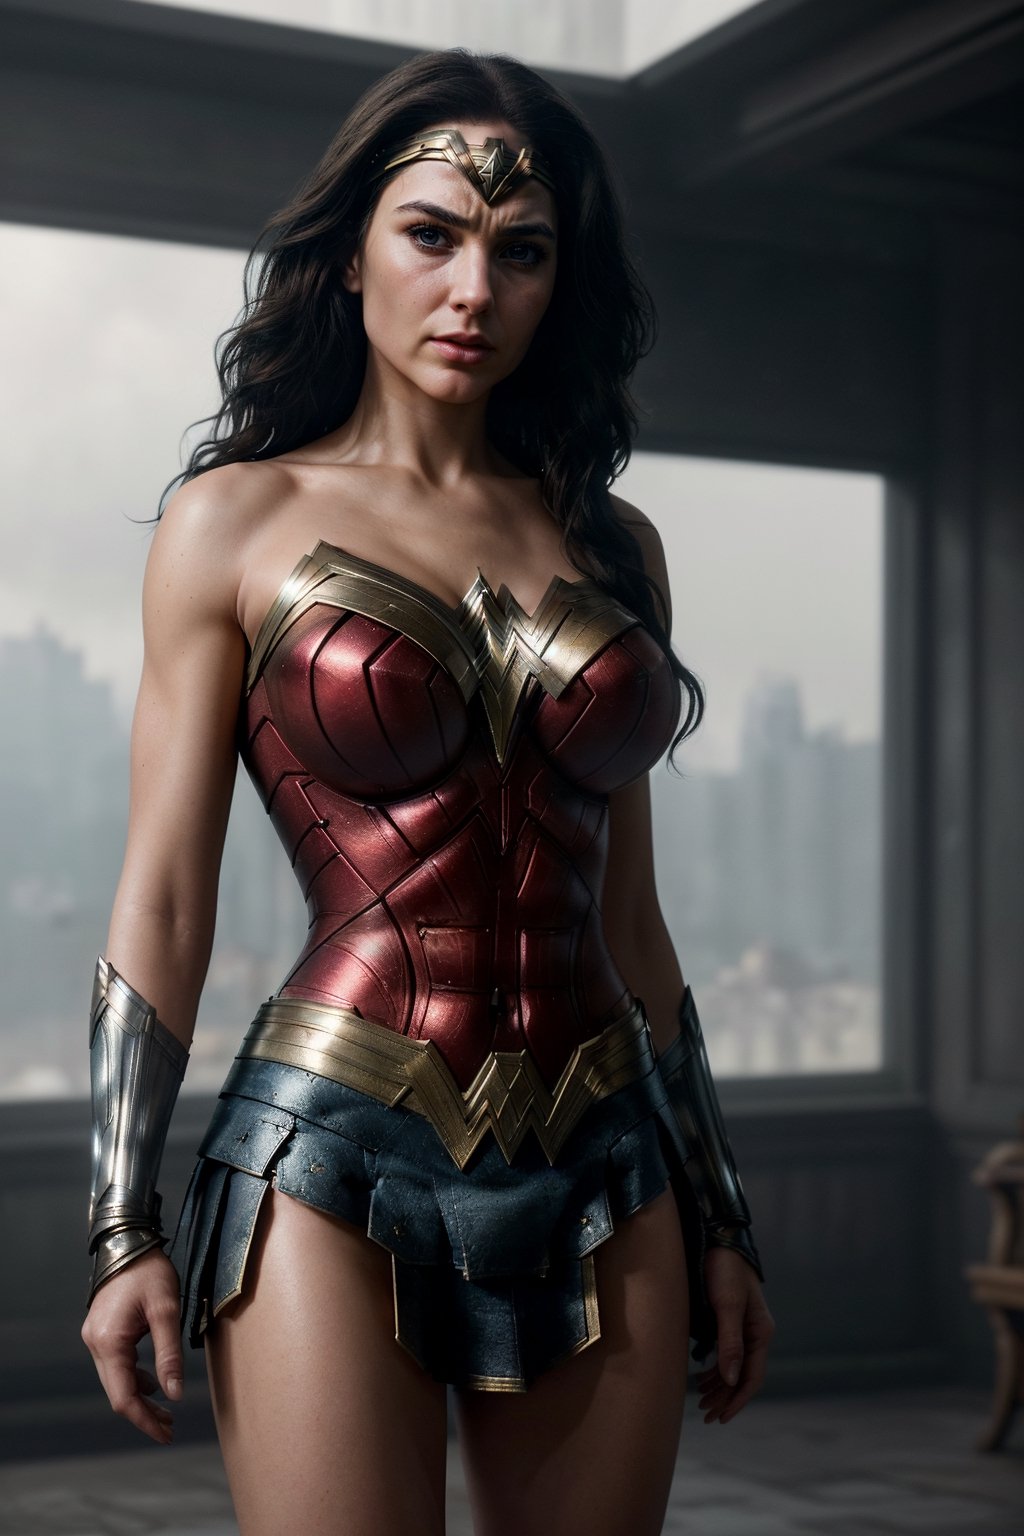 Create a highly detailed and ultra-realistic cinematic portrait of Wonder Woman, medium tits, in the style of a magazine cover. The image should exude a captivating and dramatic atmosphere, with as the central focus. Pay special attention to their facial features, clothing, and overall appearance, ensuring that every detail is meticulously rendered for maximum realism. The lighting should be expertly crafted to create depth and dimension, with a careful balance of highlights and shadows to bring out the best in features. The background should complement the subject without overshadowing them, adding to the overall cinematic feel of the image. 